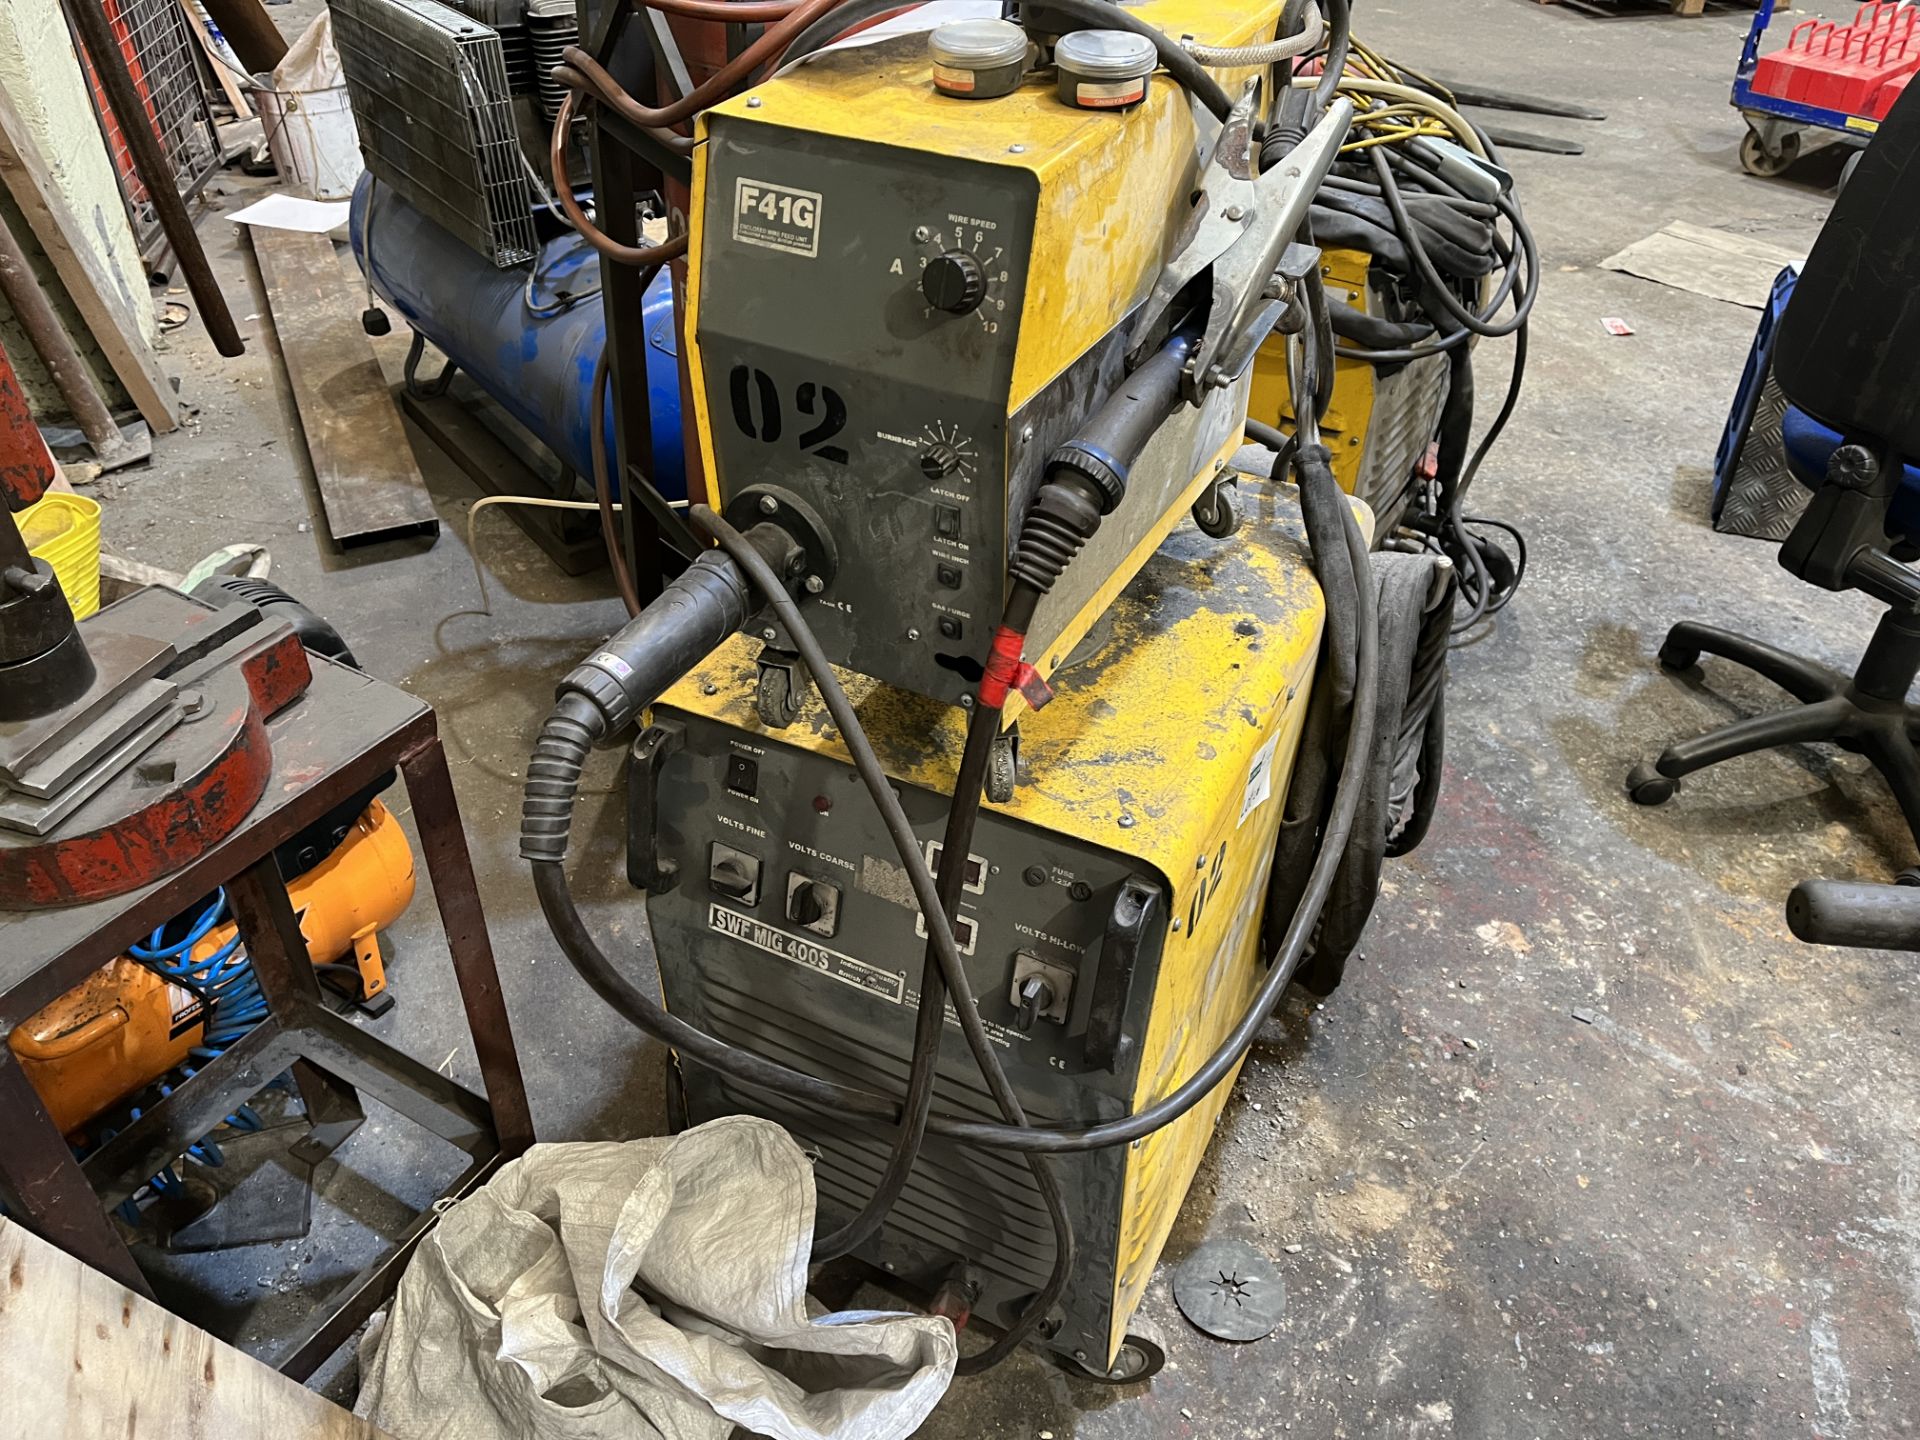 TEC ARC SWF MIC400S MIG WELDER WITH F41G ENCLOSED WIRE FEED UNIT (GAS NOT INCLUDED) (BUILDING 2)